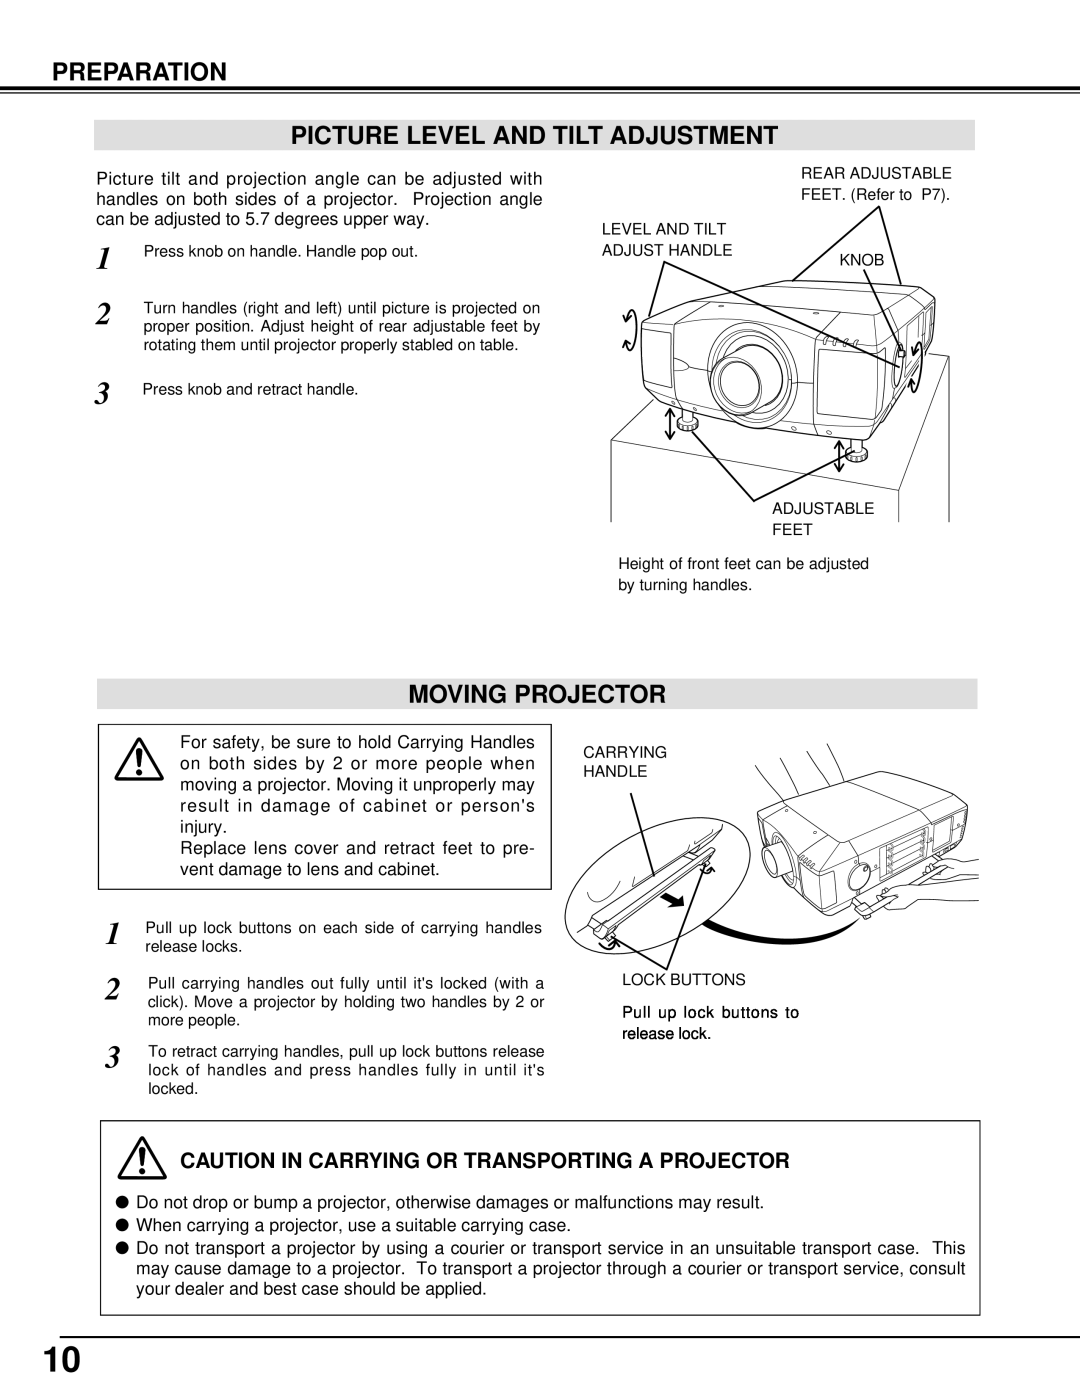 Eiki LC-UXT1 instruction manual Preparation Picture Level And Tilt Adjustment, Moving Projector 